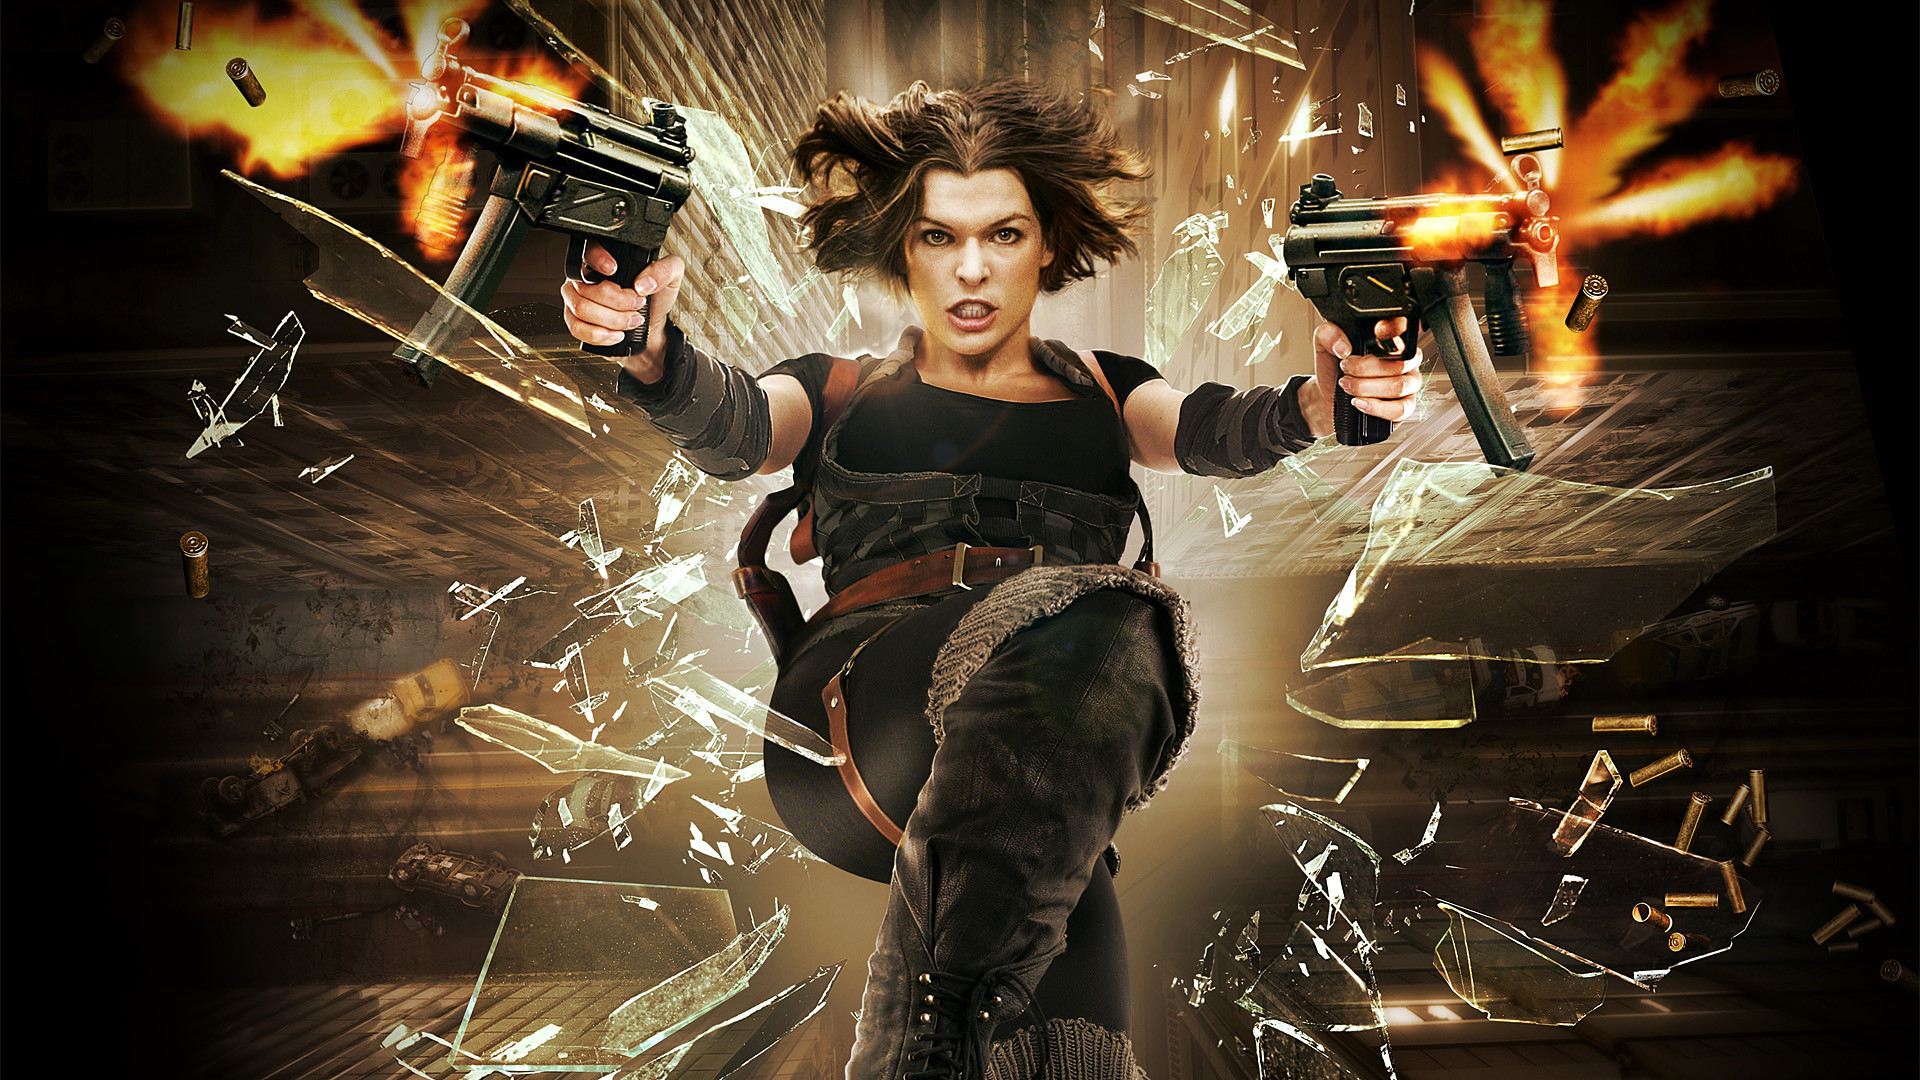 Amazing Resident Evil: Afterlife Pictures & Backgrounds